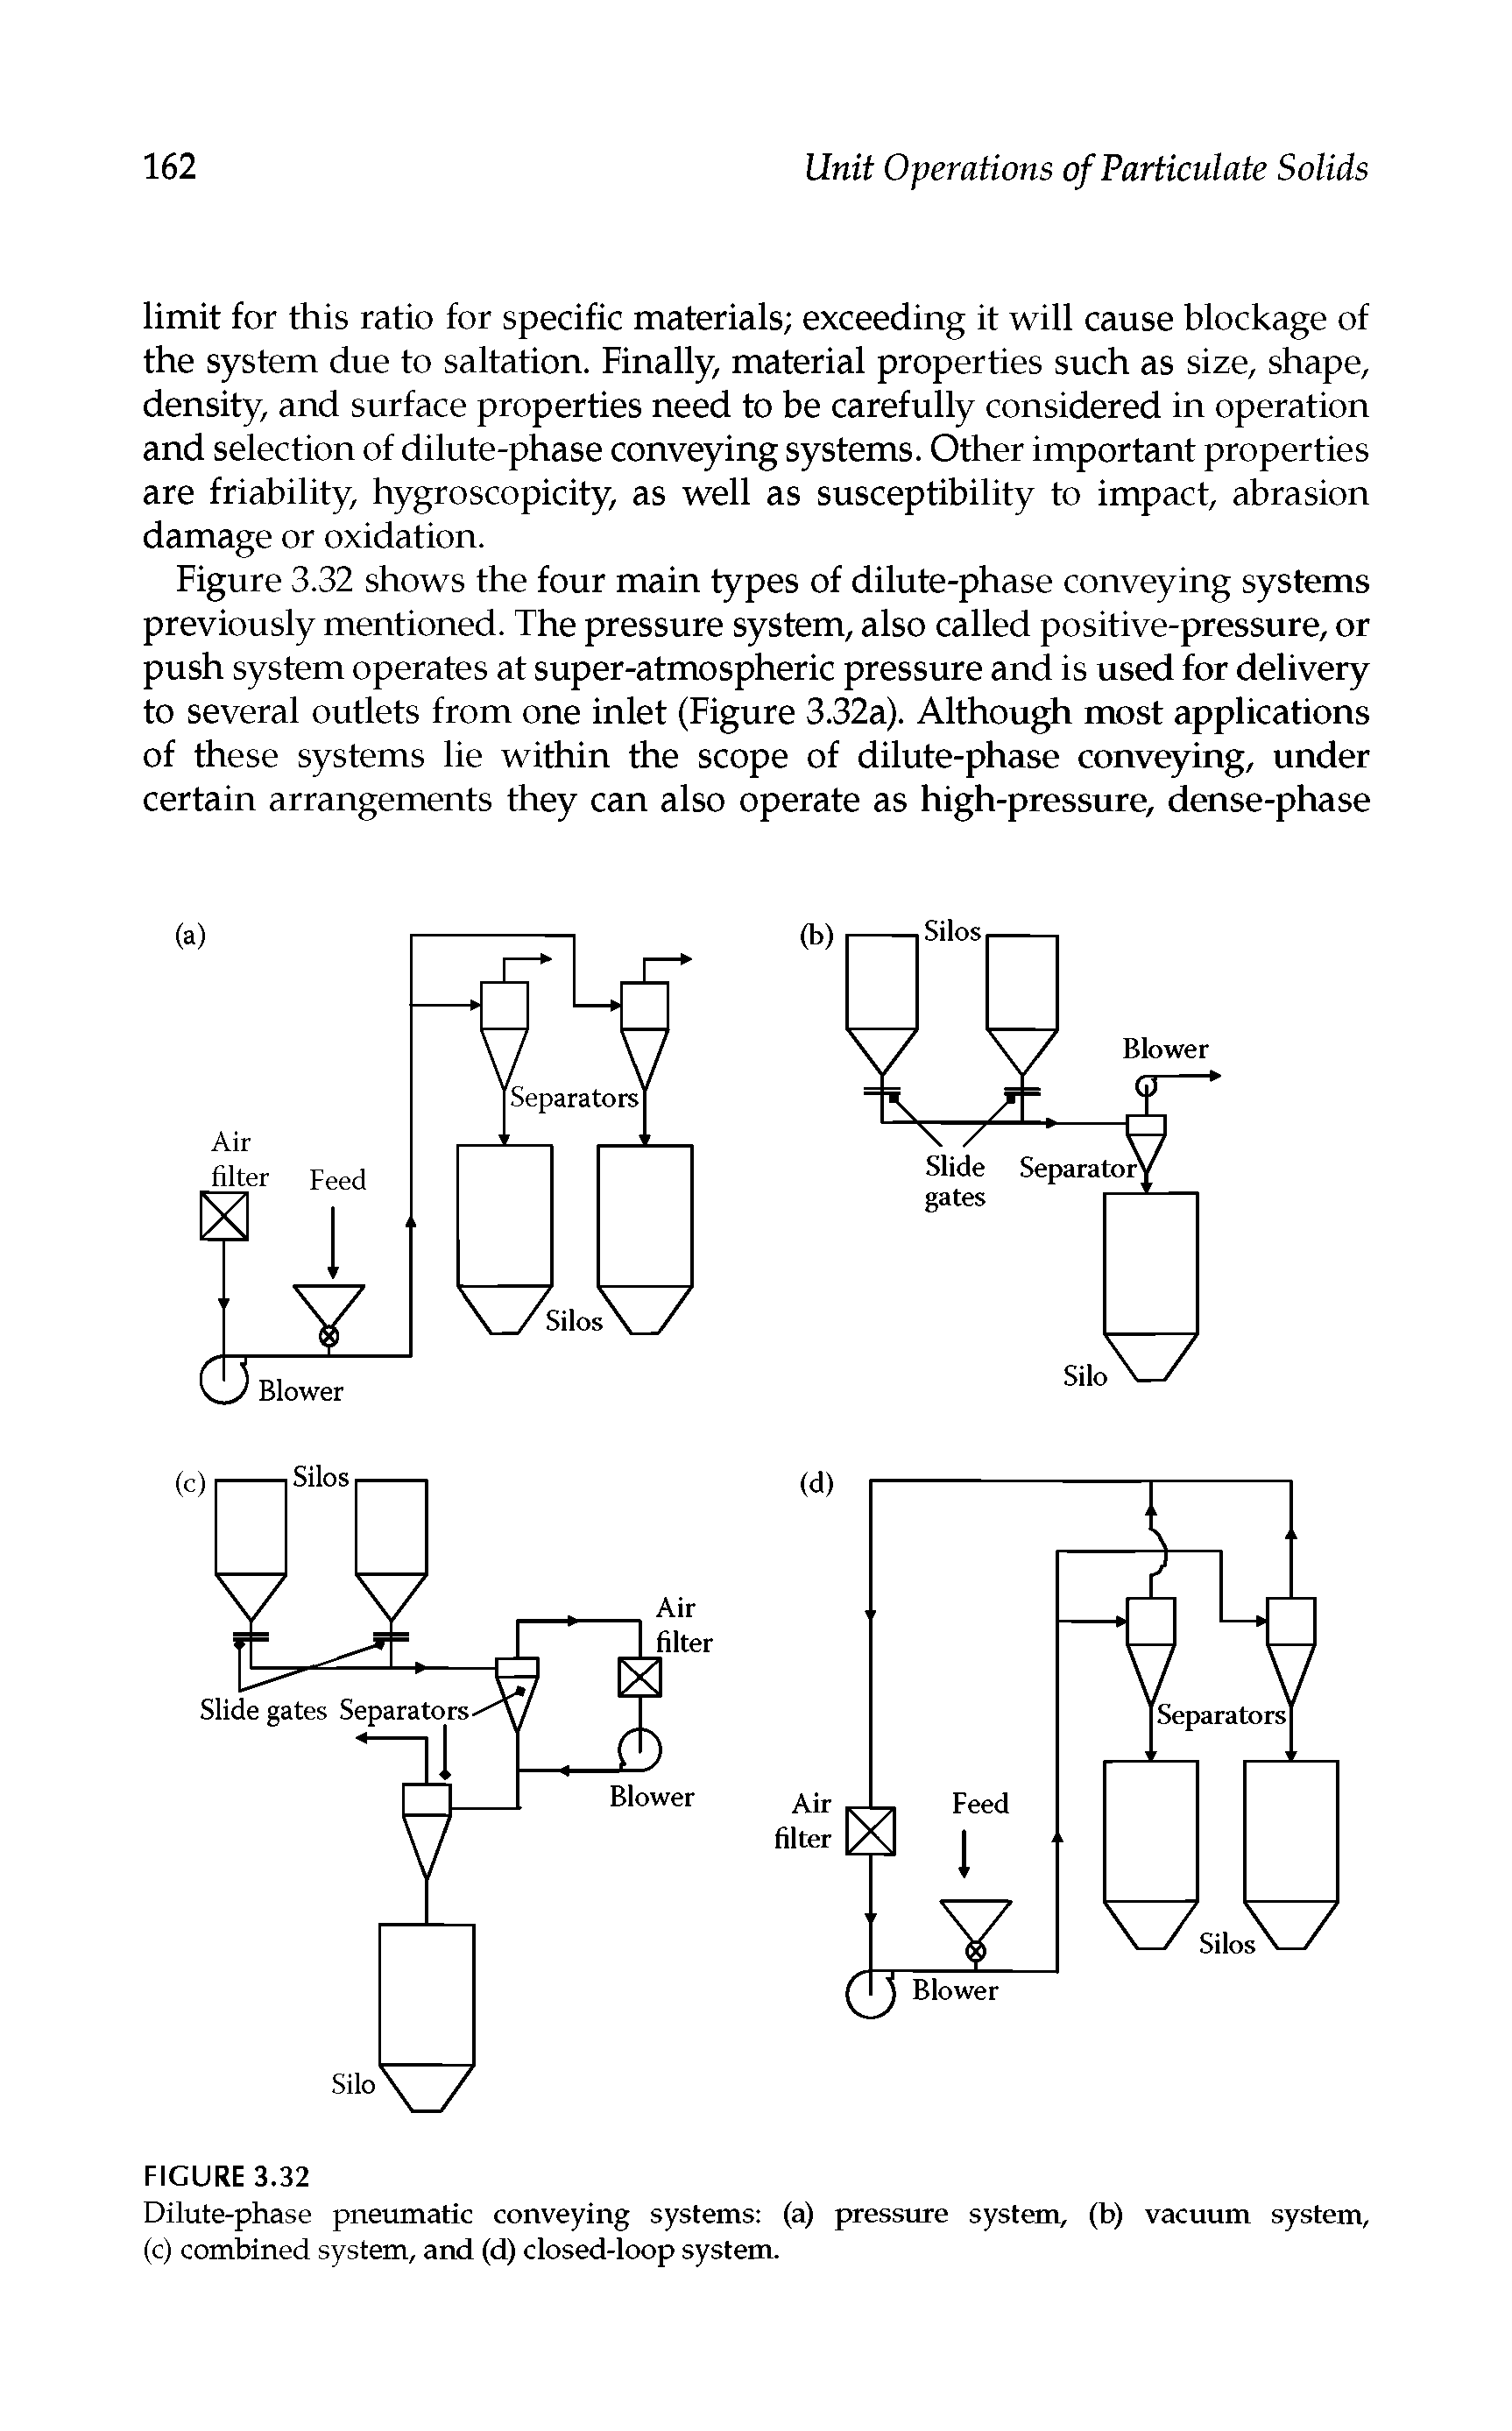 Figure 3.32 shows the four main types of dilute-phase conveying systems previously mentioned. The pressure system, also called positive-pressure, or push system operates at super-atmospheric pressure and is used for delivery to several outlets from one inlet (Figure 3.32a). Although most applications of these systems lie within the scope of dilute-phase conveying, under certain arrangements they can also operate as high-pressure, dense-phase...